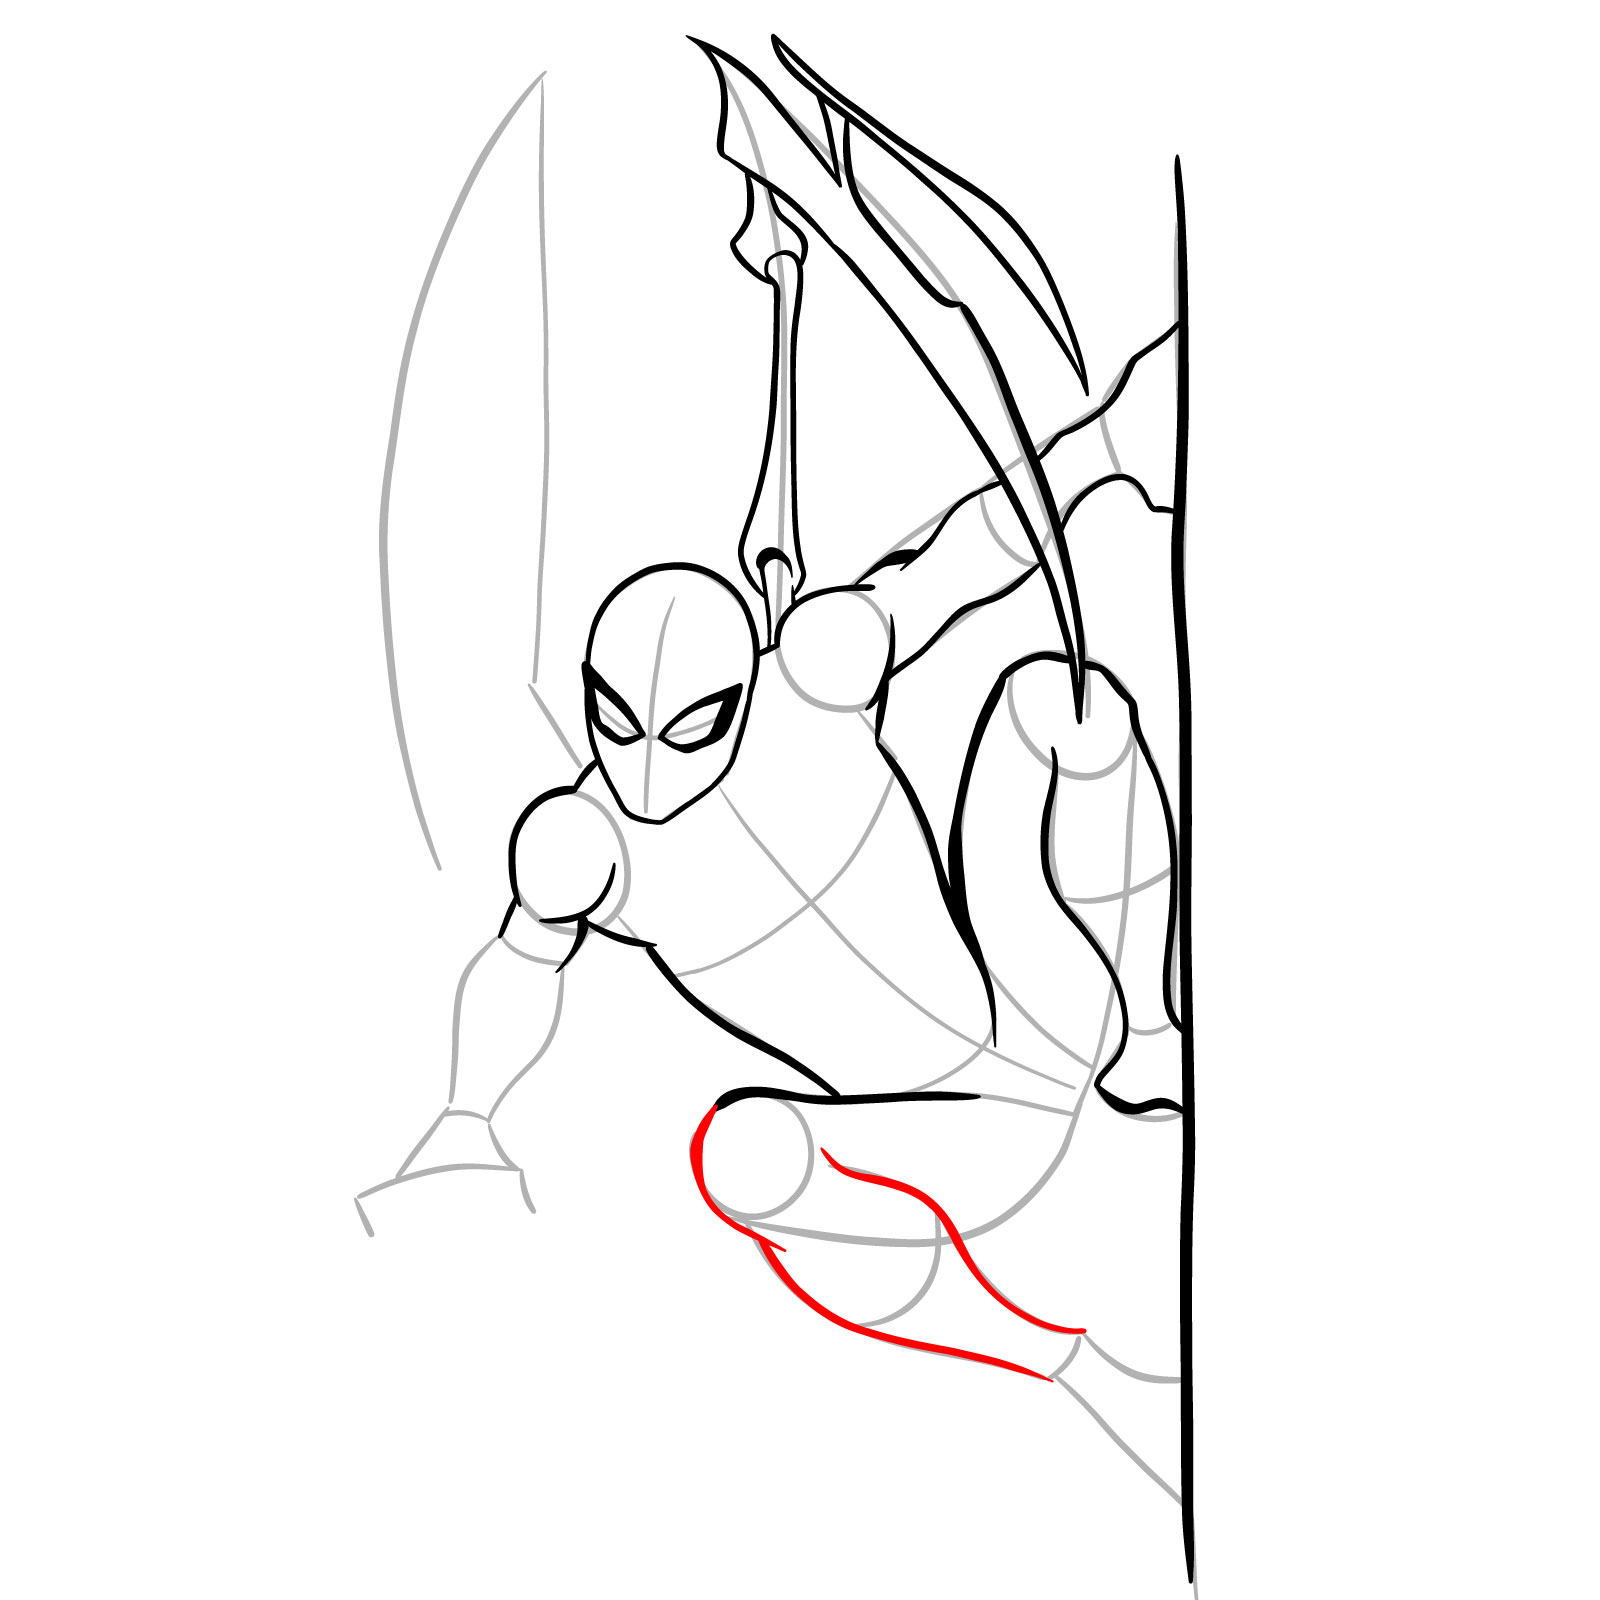 How to draw The Superior Spider-Man - step 20